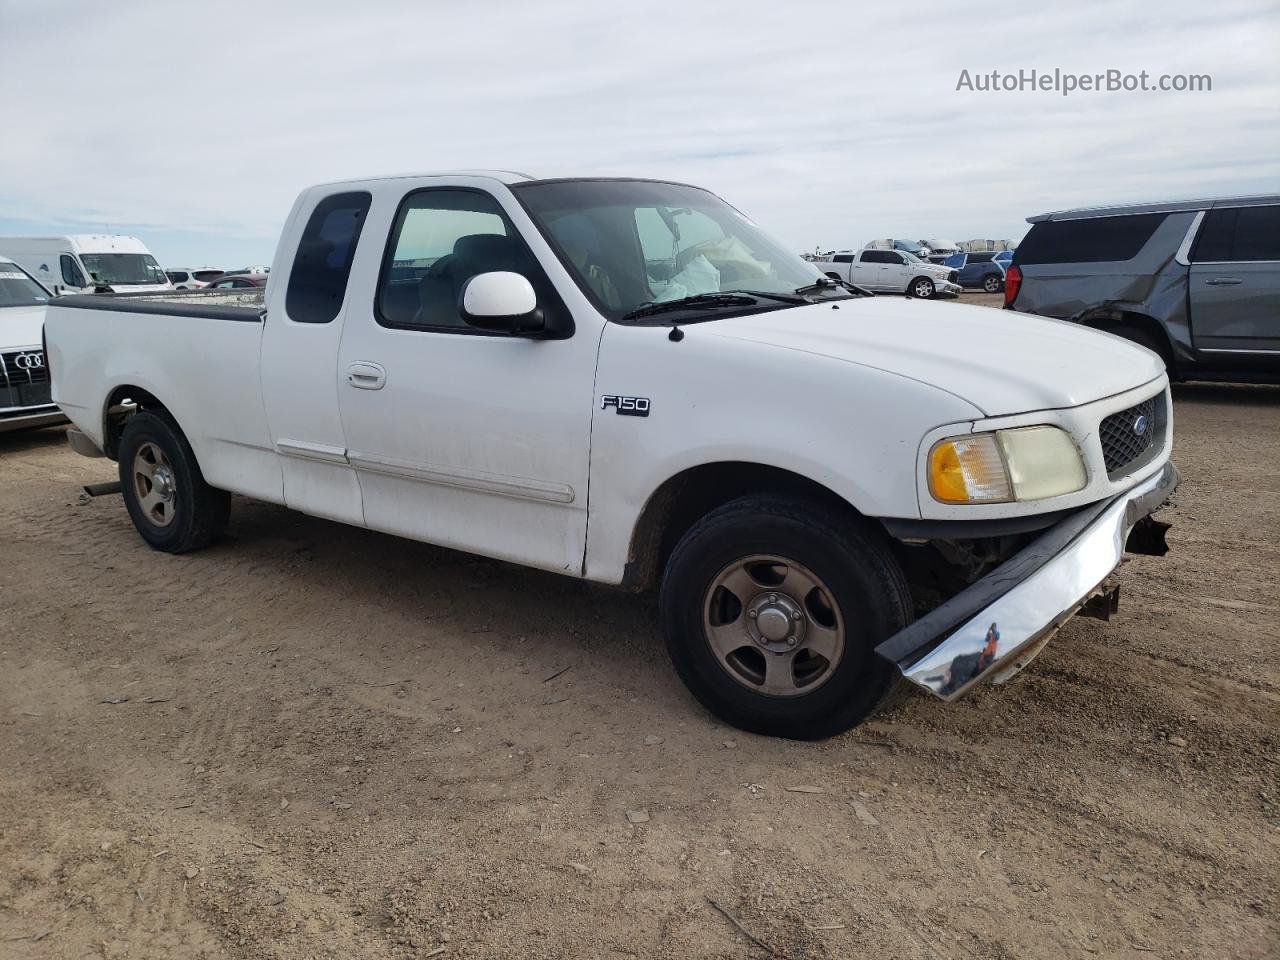 2001 Ford F150  Белый vin: 2FTZX17271CA94405